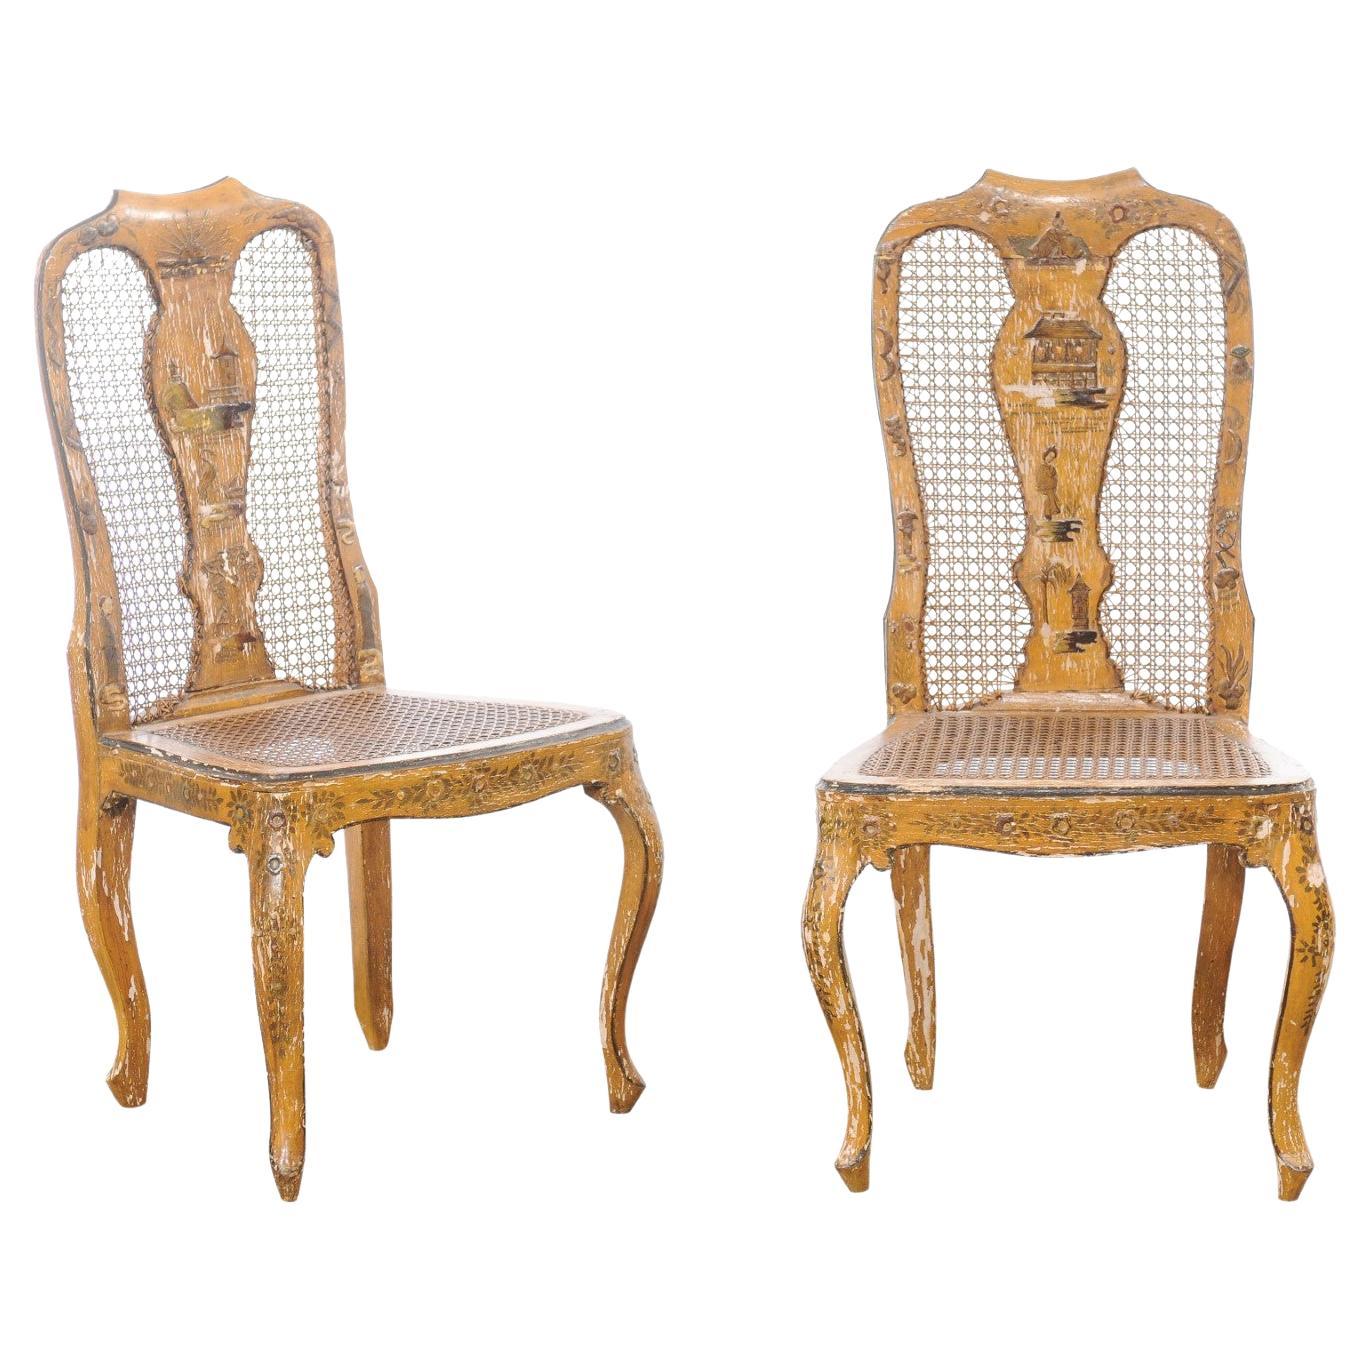 18th C. Pair of Italian Side Chairs w/Hand-Painted Chinoiserie & Caning